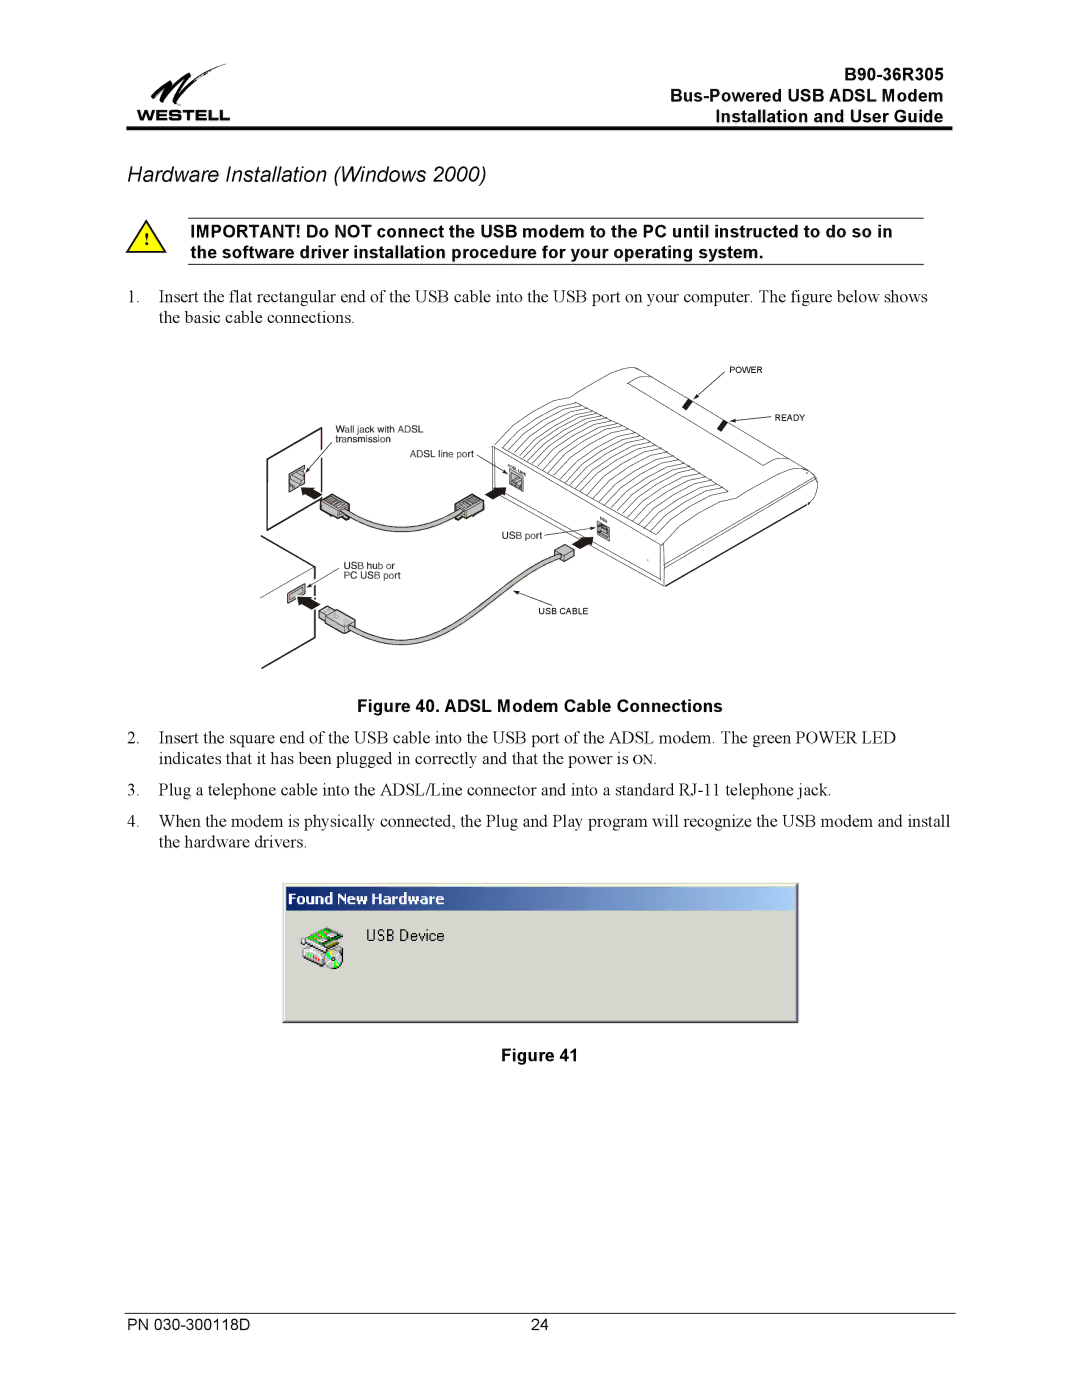 Westell Technologies B90-36R305 manual Hardware Installation Windows, Adsl Modem Cable Connections 